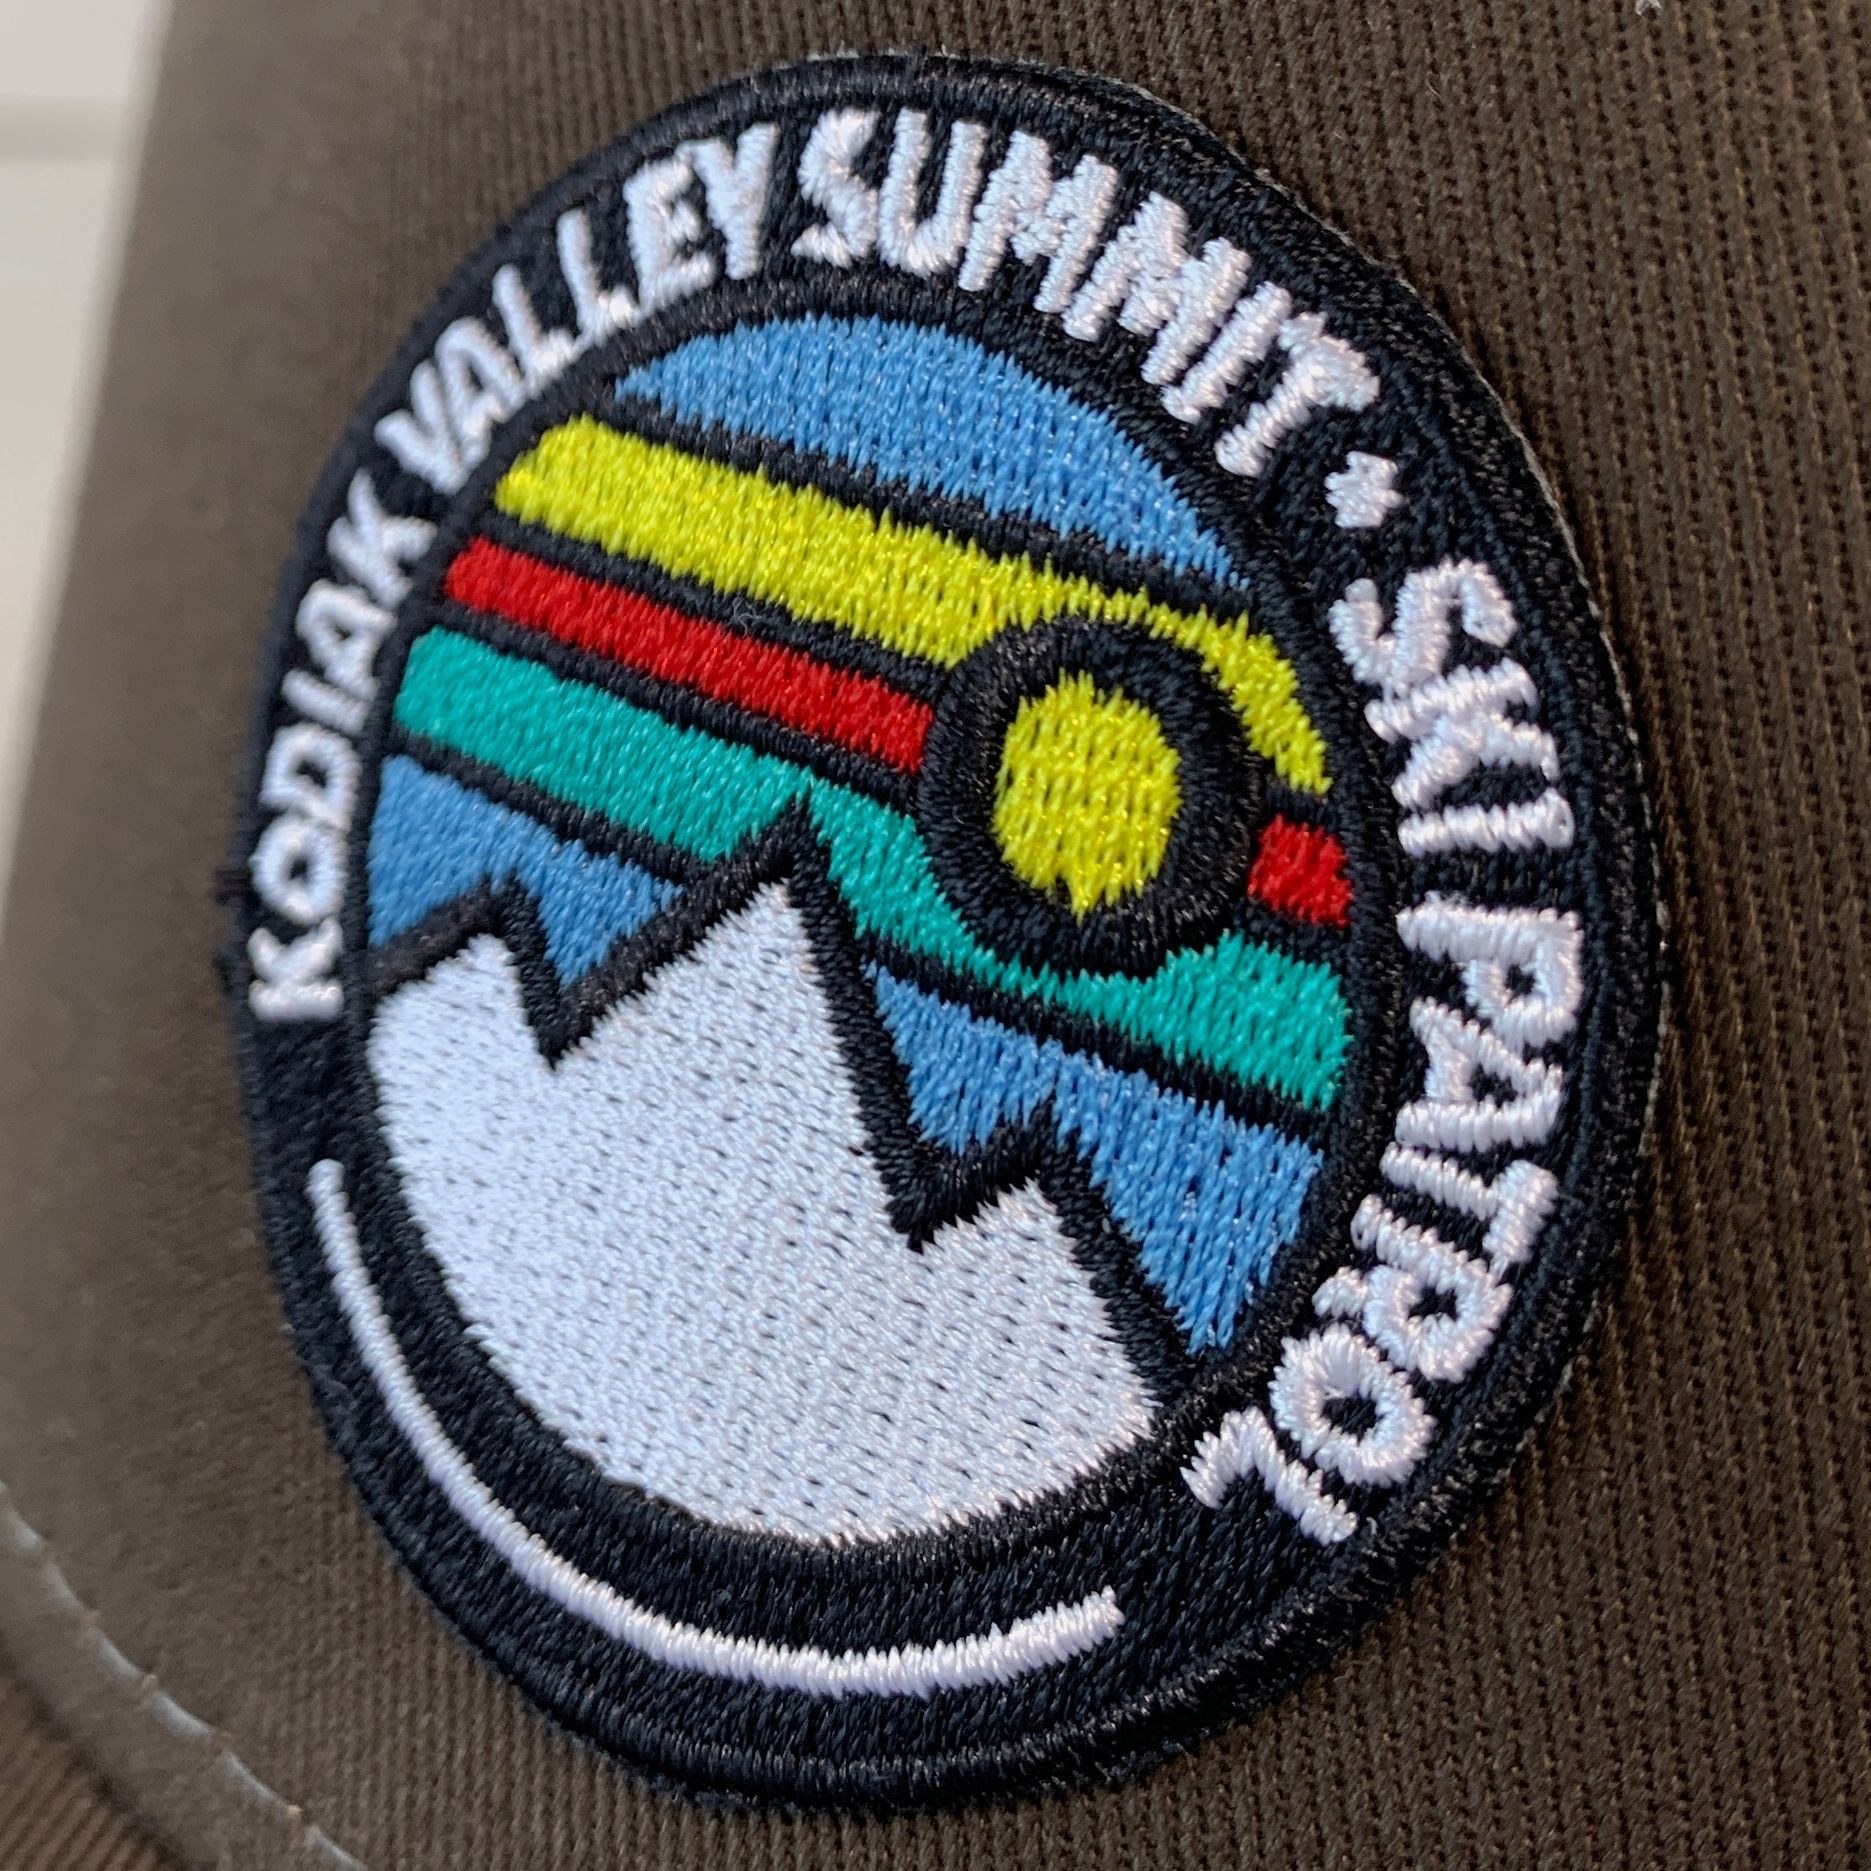 Embroidered Patches, hats